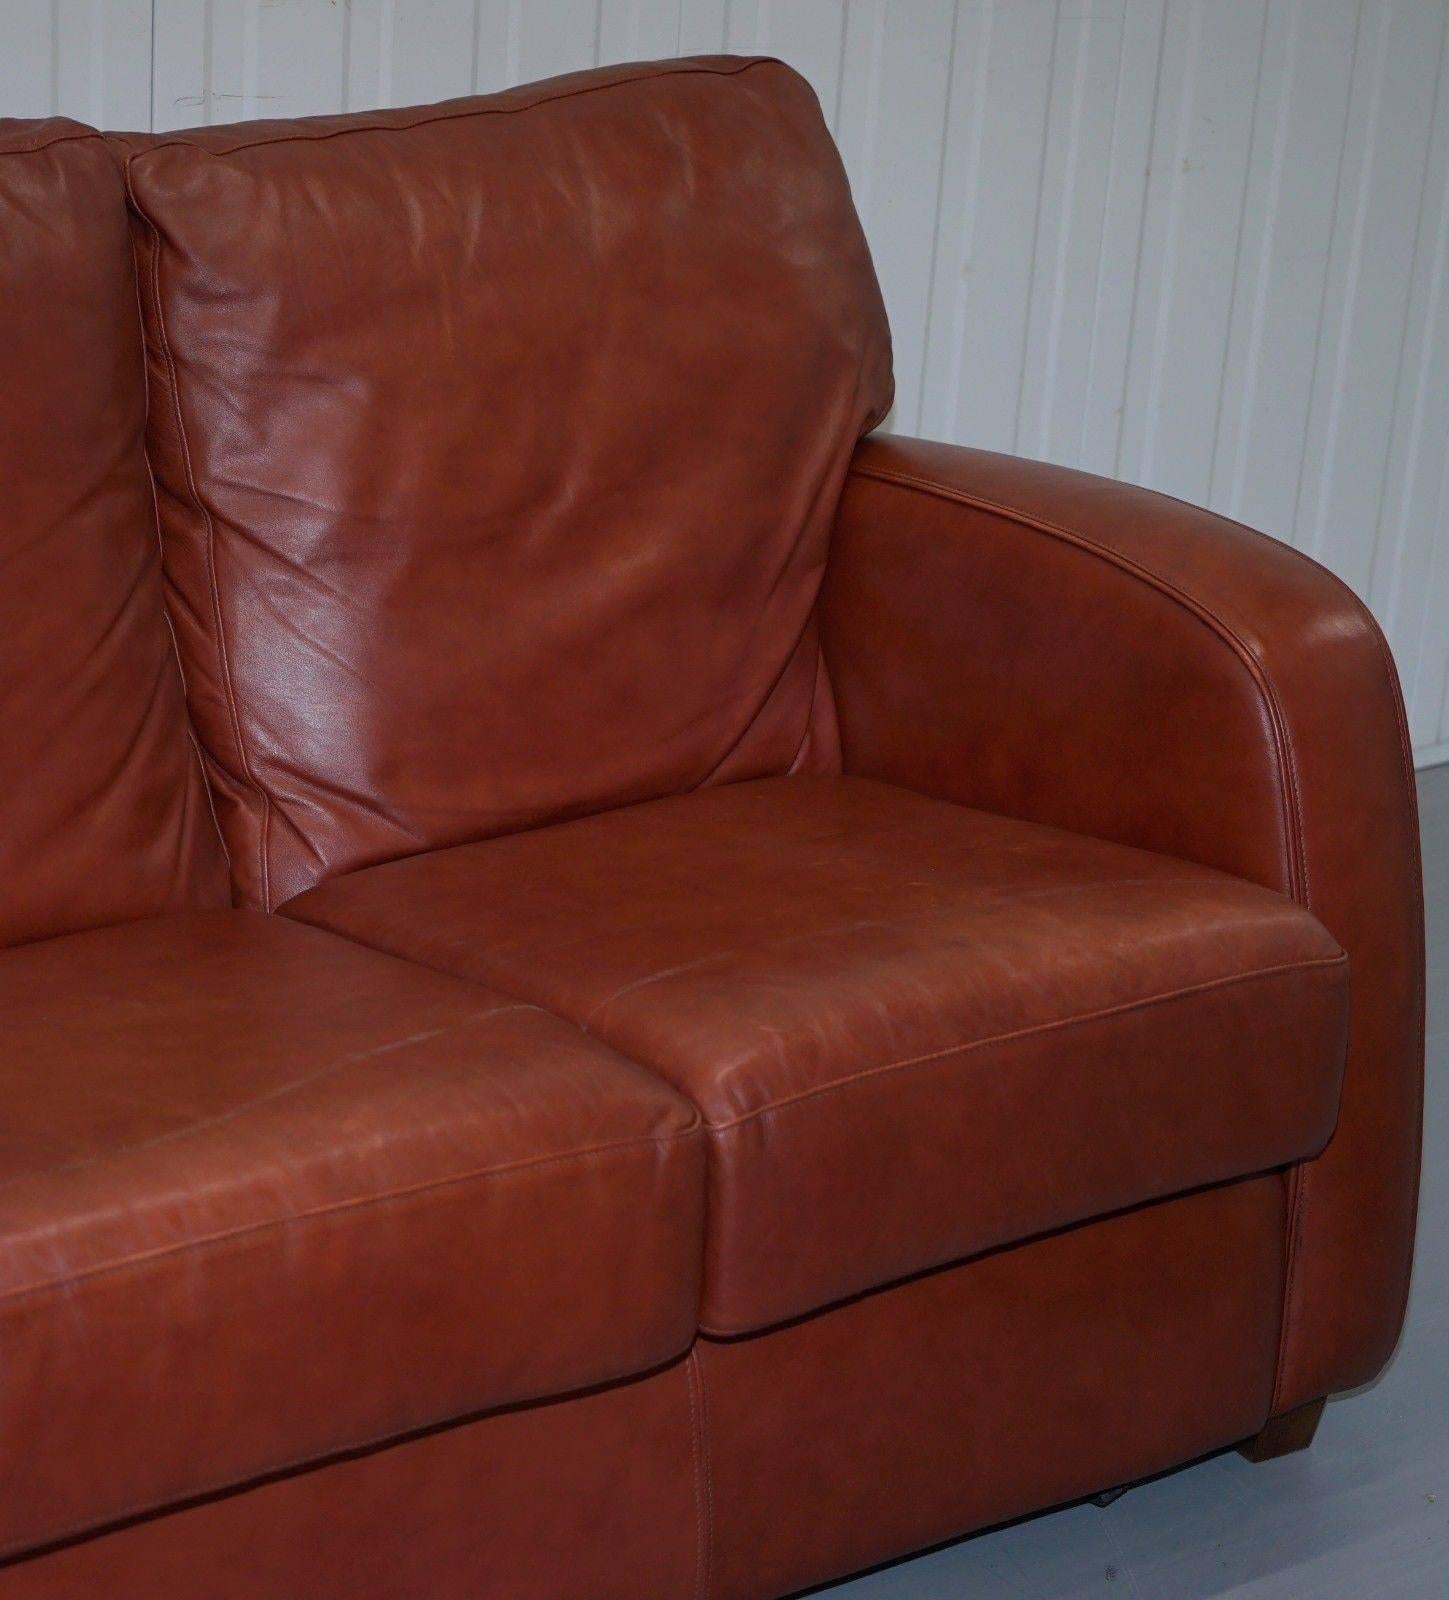 Modern Lovely Aged Chestnut Brown Leather Three-Seat Sofa Great Color and Comfortable